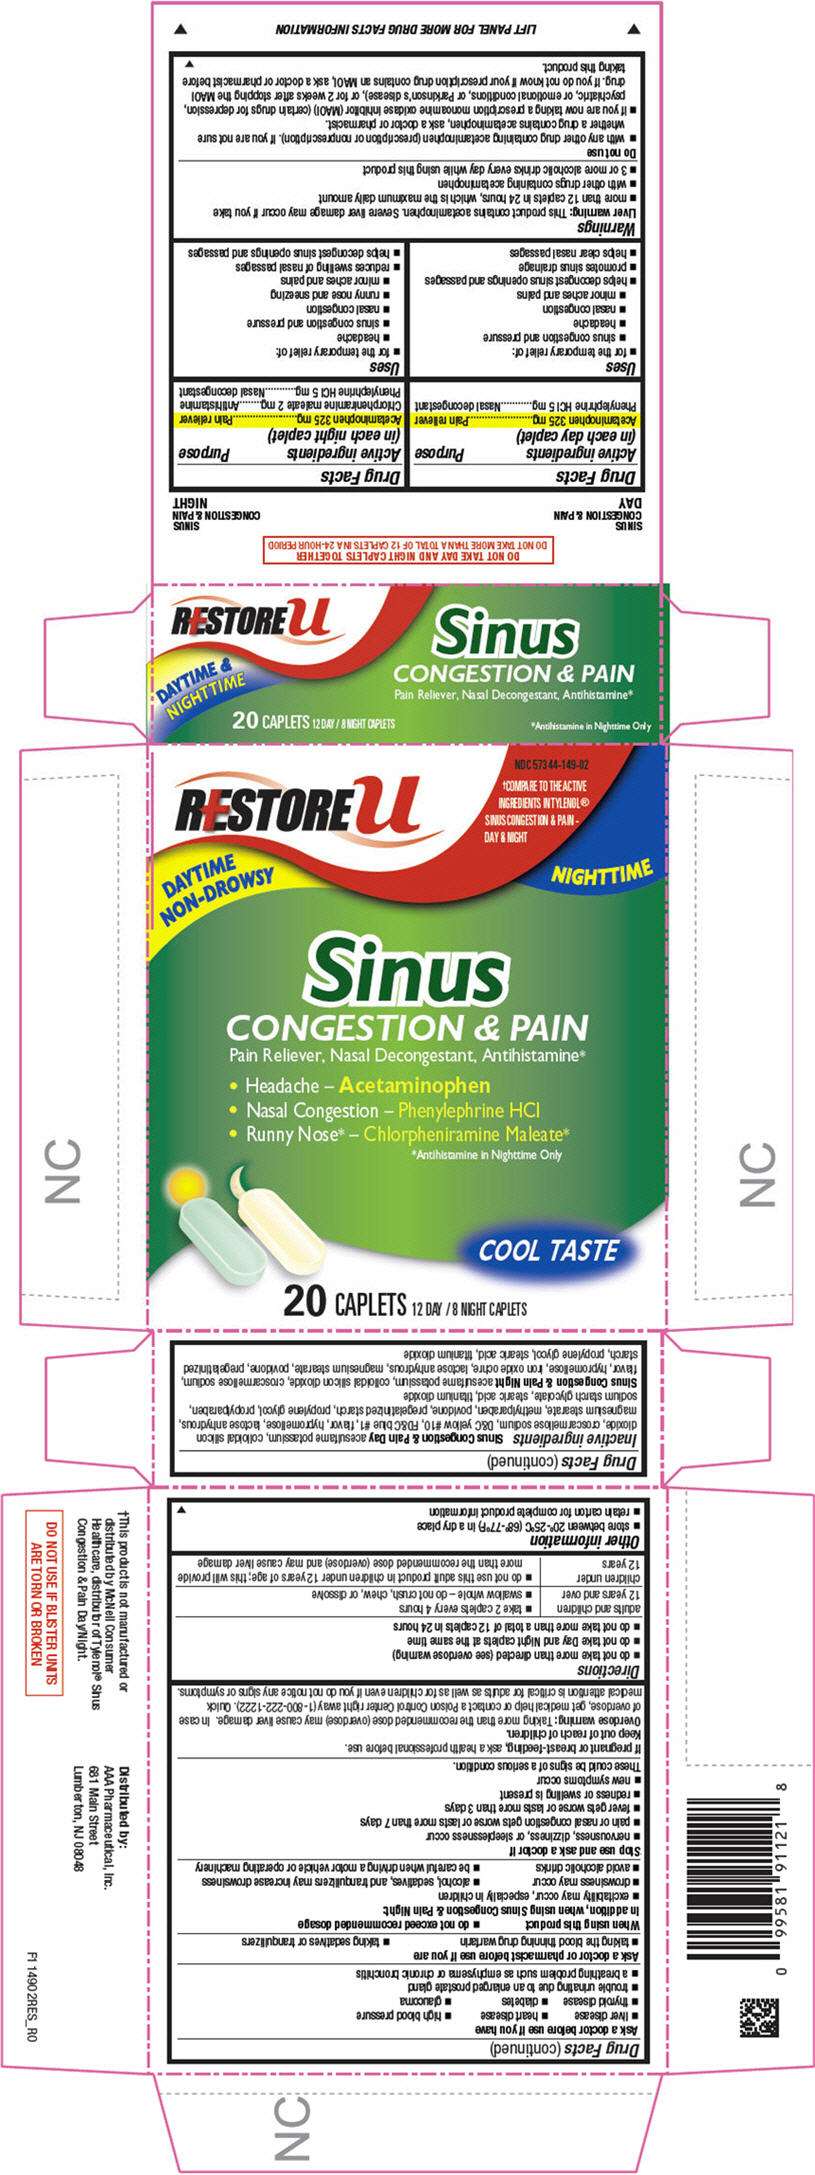 Sinus Congestion and Pain Daytime Nighttime